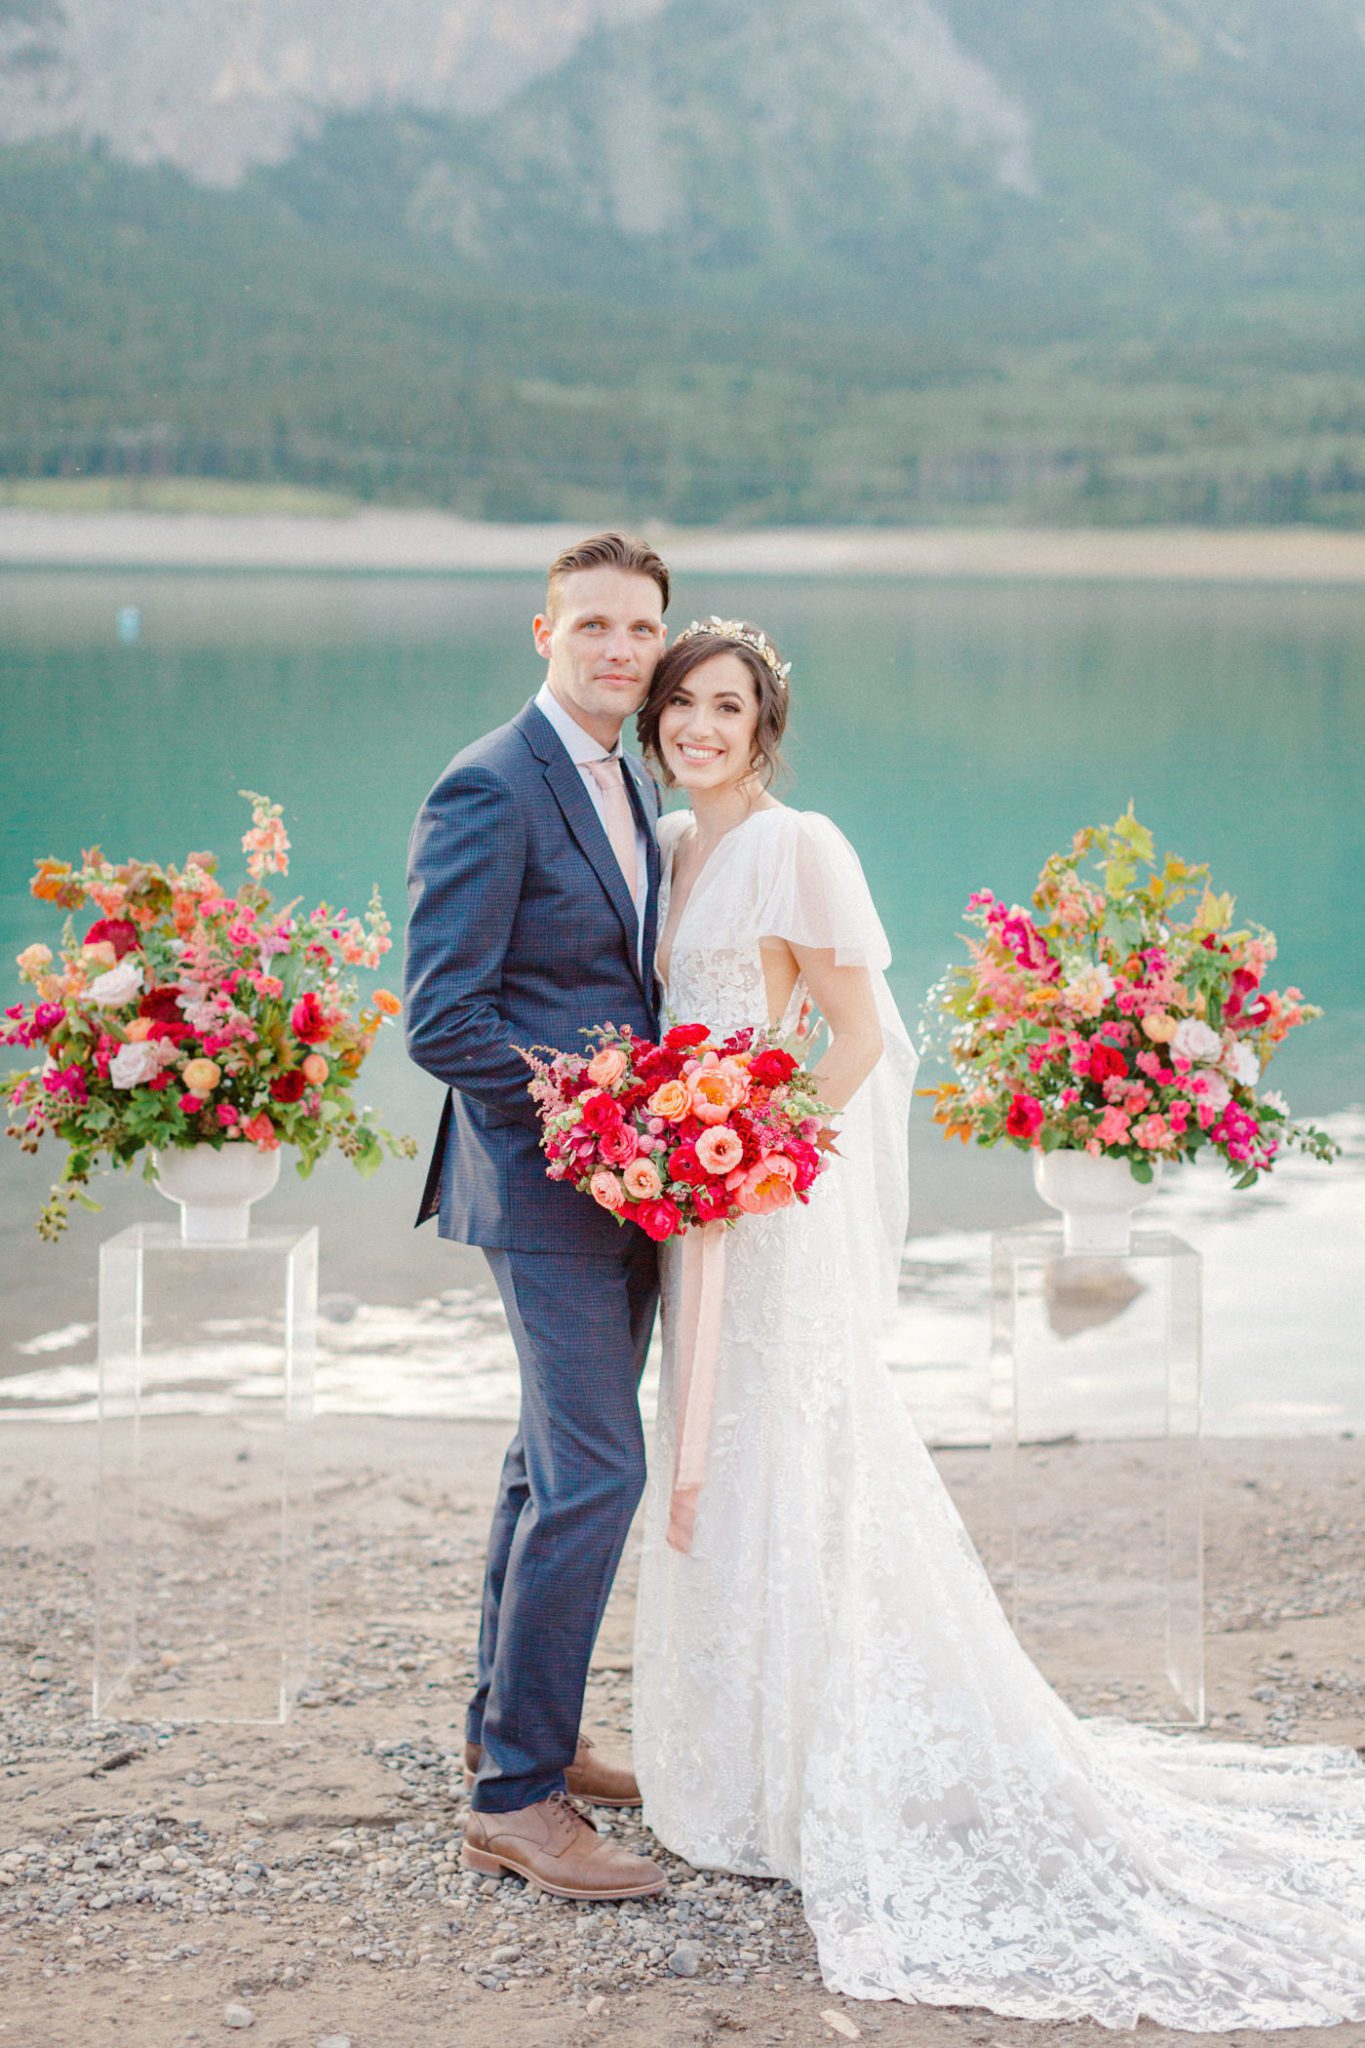 Dreamy summer lakeside wedding inspiration with vibrant orange and red florals